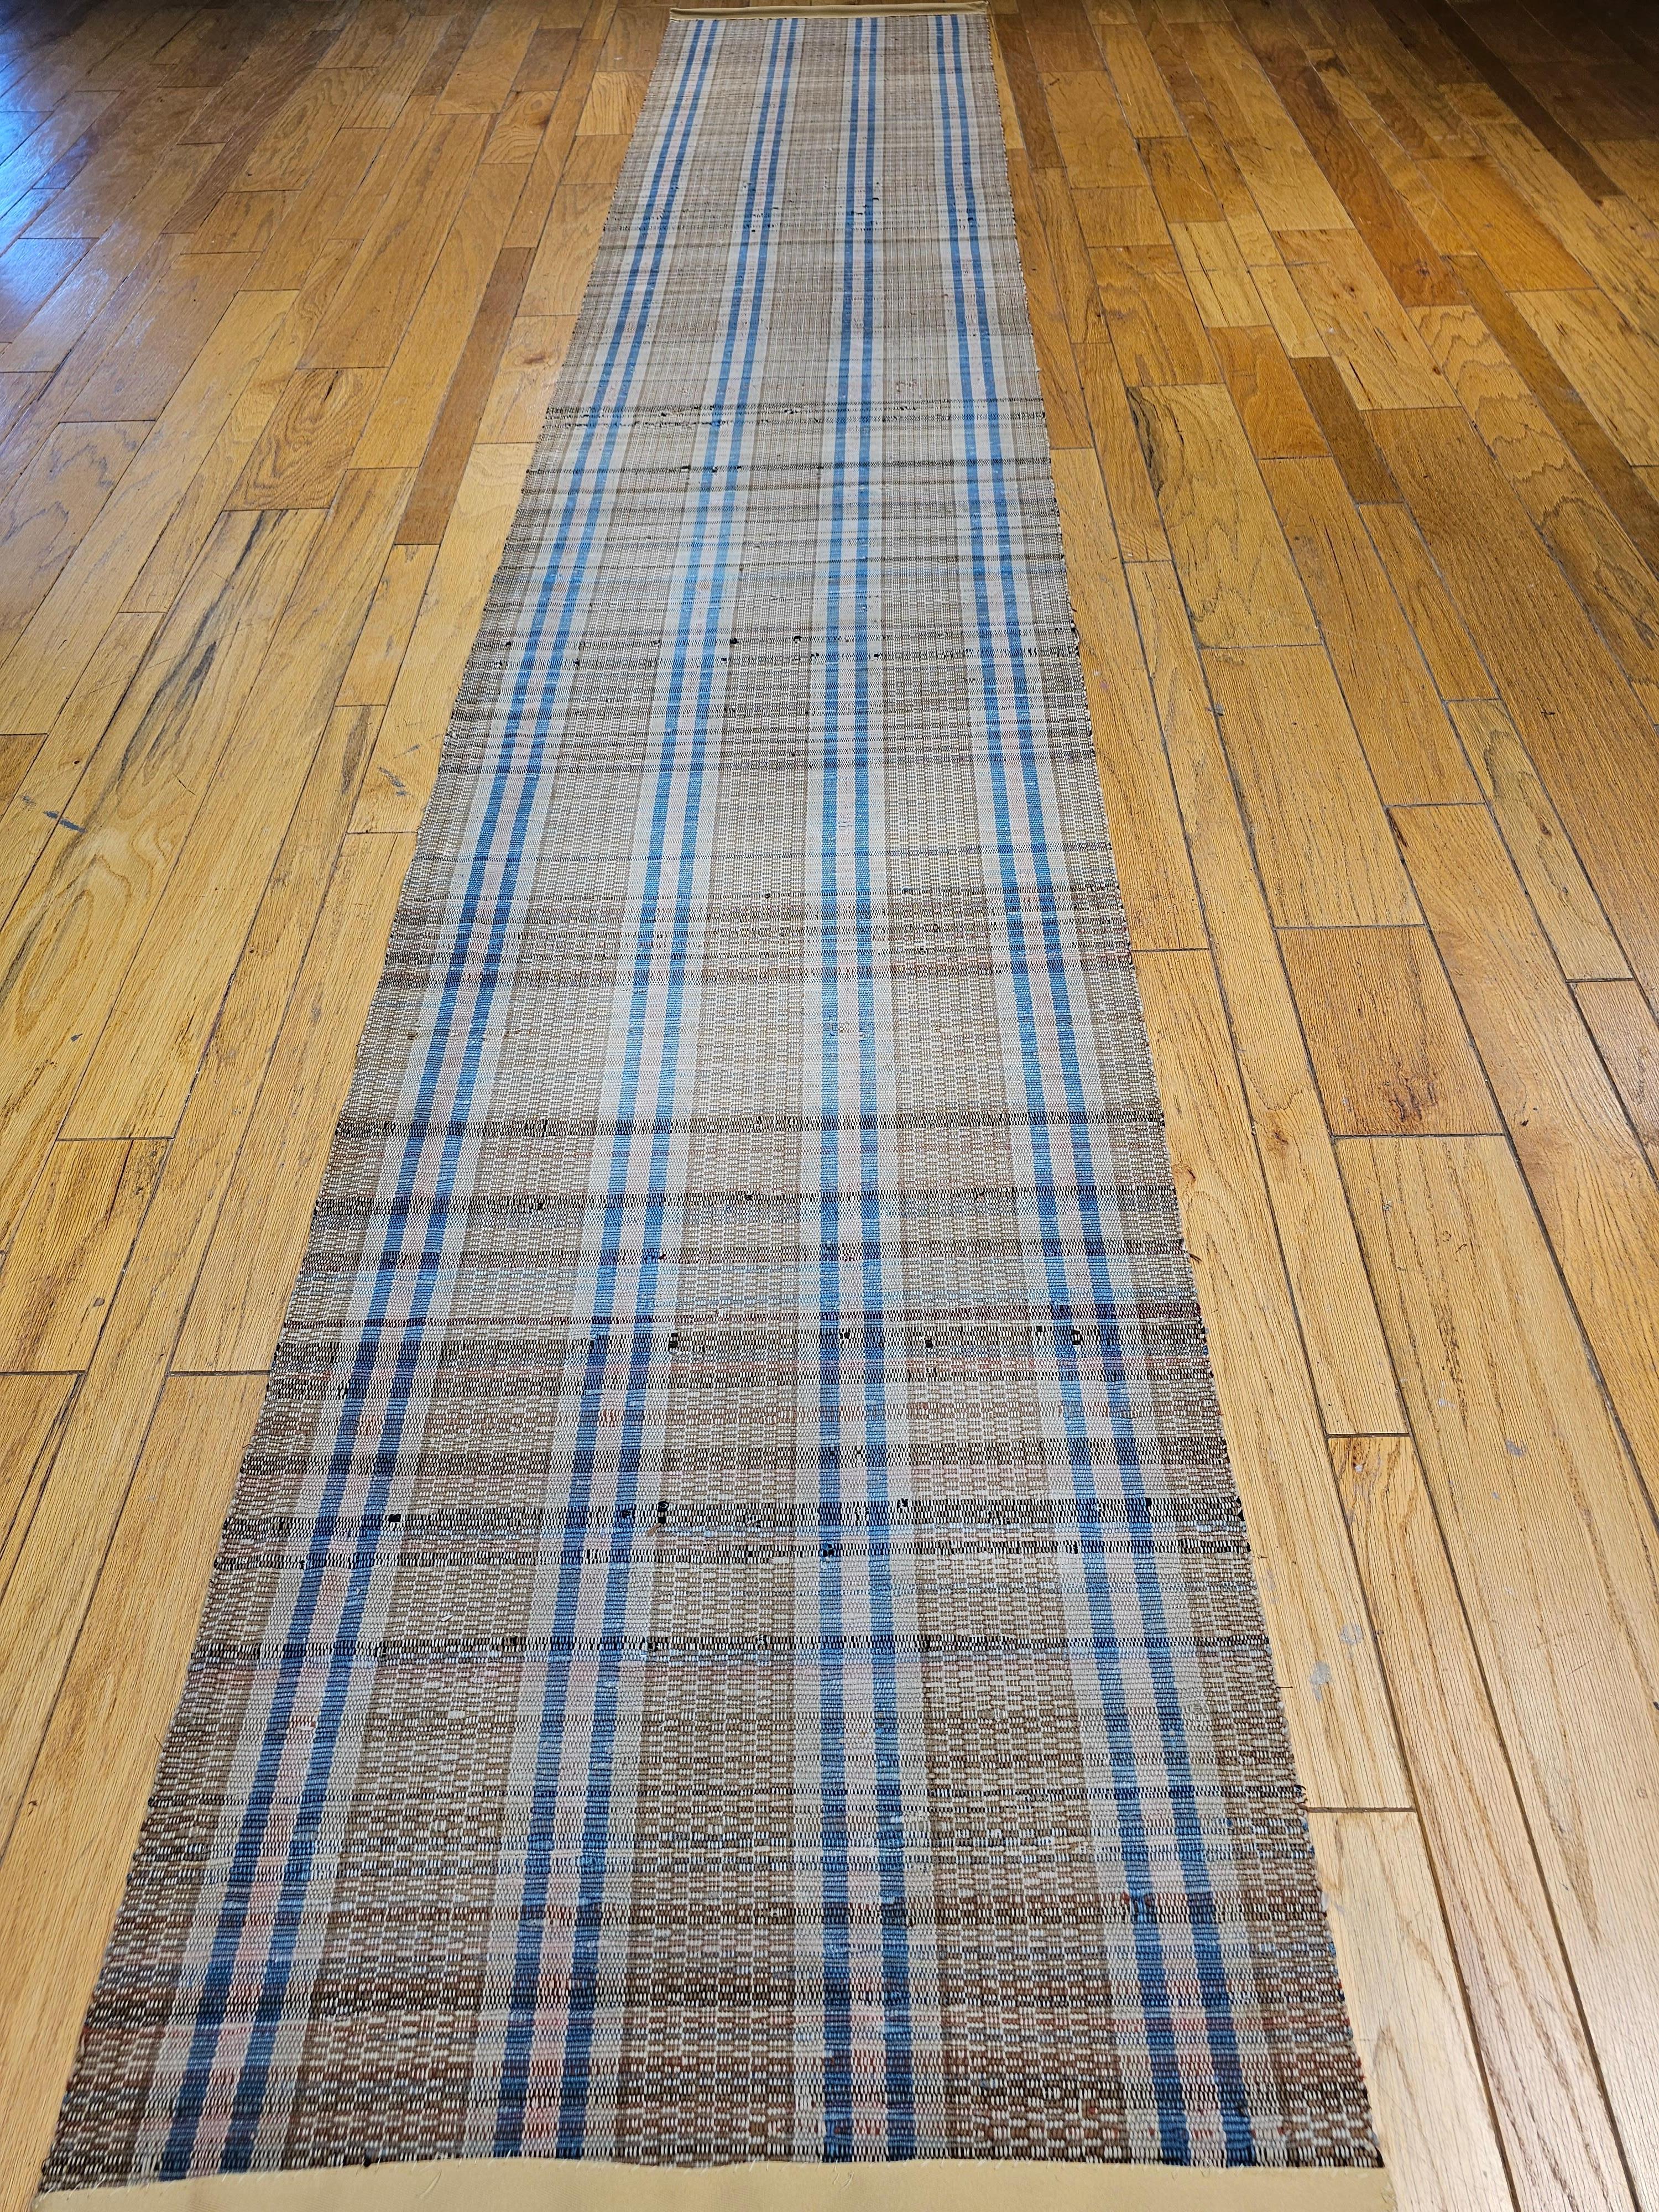 Vintage Hand-Woven American Amish Rag Runner in Pale Blue, Pink, Wheat, Caramel In Good Condition For Sale In Barrington, IL